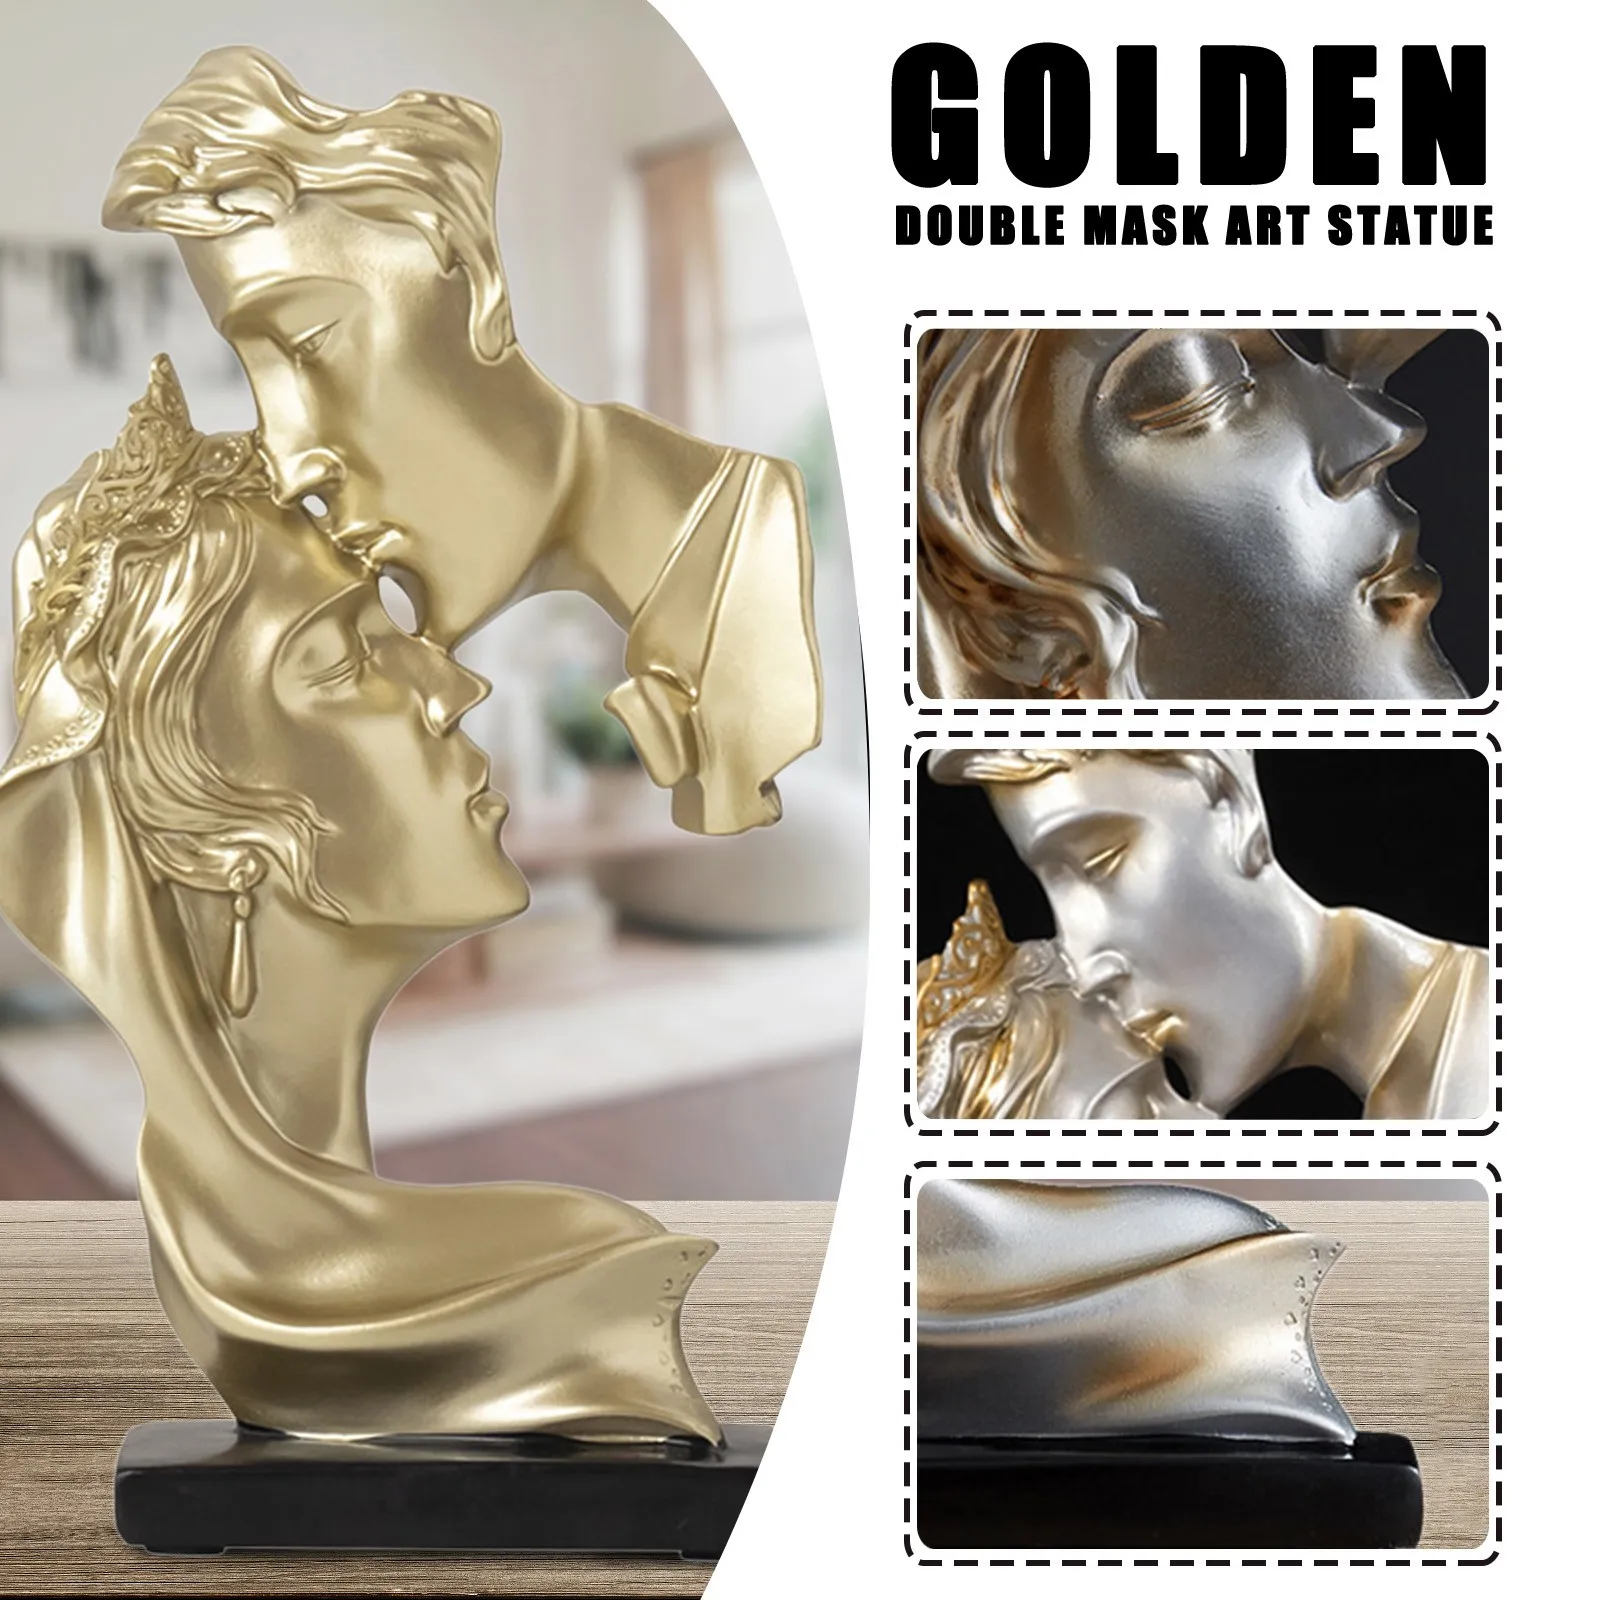 Golden Double Mask Art Statue Figure Sculpture Retro Luxury Gifts Decompression Stress Relief Autism Need Thinking Toys Hot Action Figures Aliexpress - statue roblox shirt